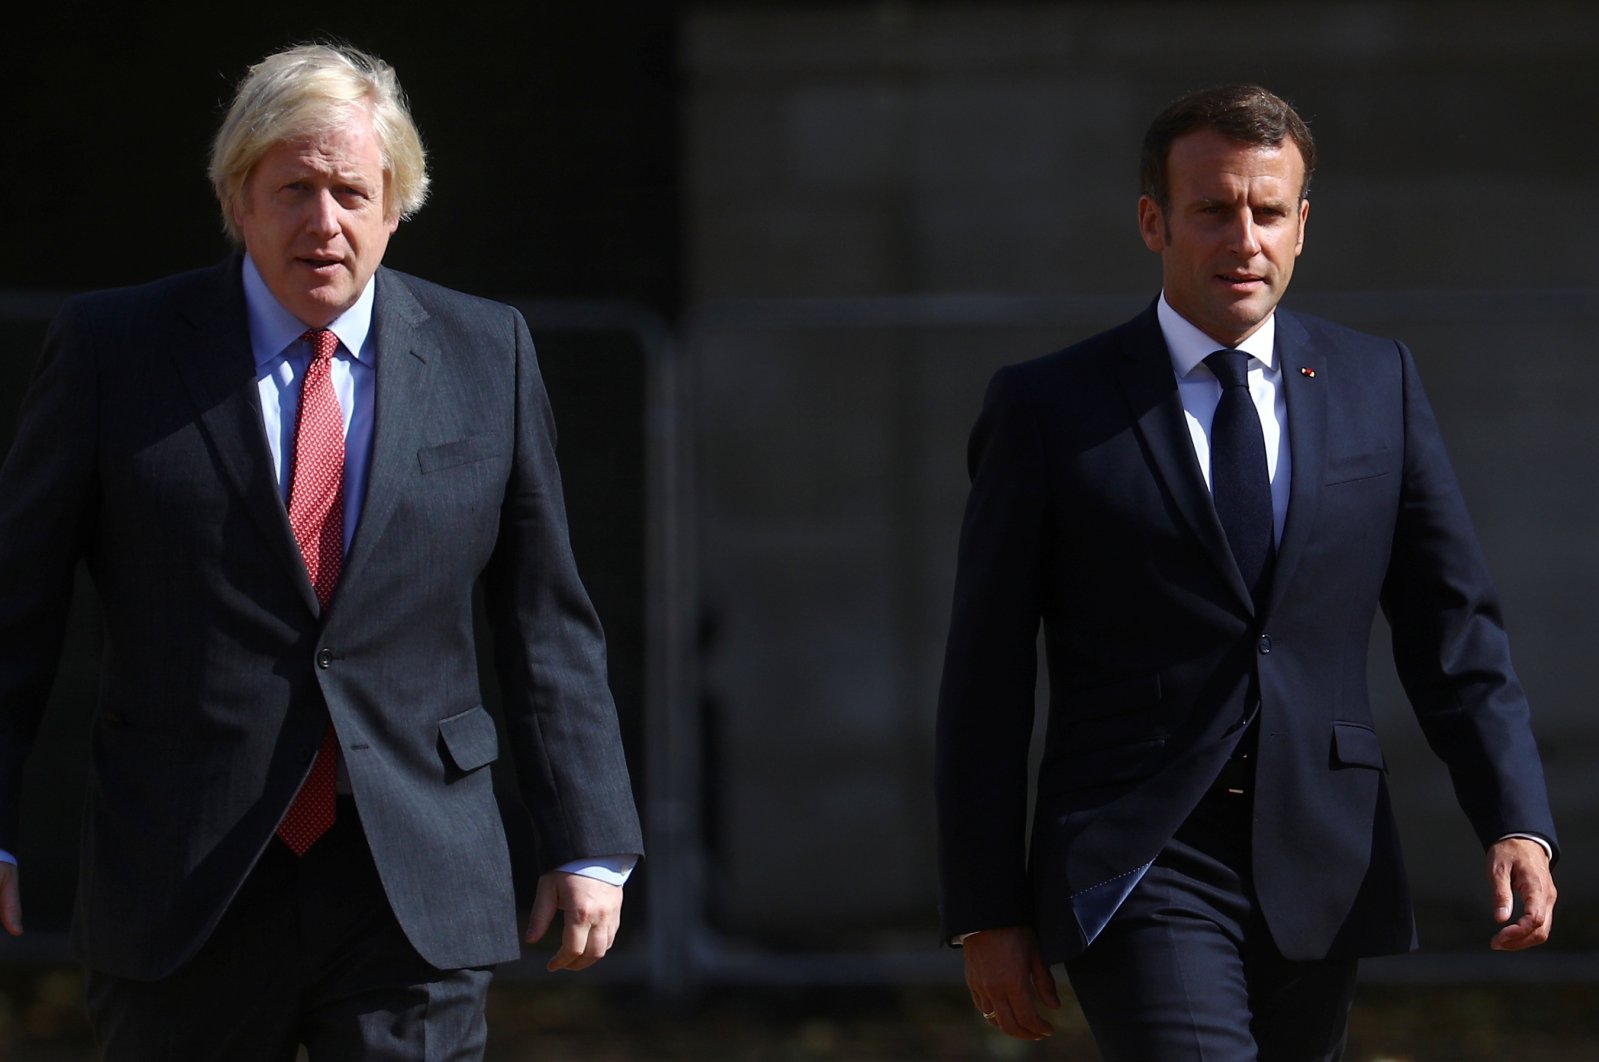 British Prime Minister Boris Johnson (L) and French President Emmanuel Macron walk after watching The Red Arrows and La Patrouille de France perform a flypast, at Horse Guards Parade in London, Britain, June 18, 2020. (EPA-EFE Photo)